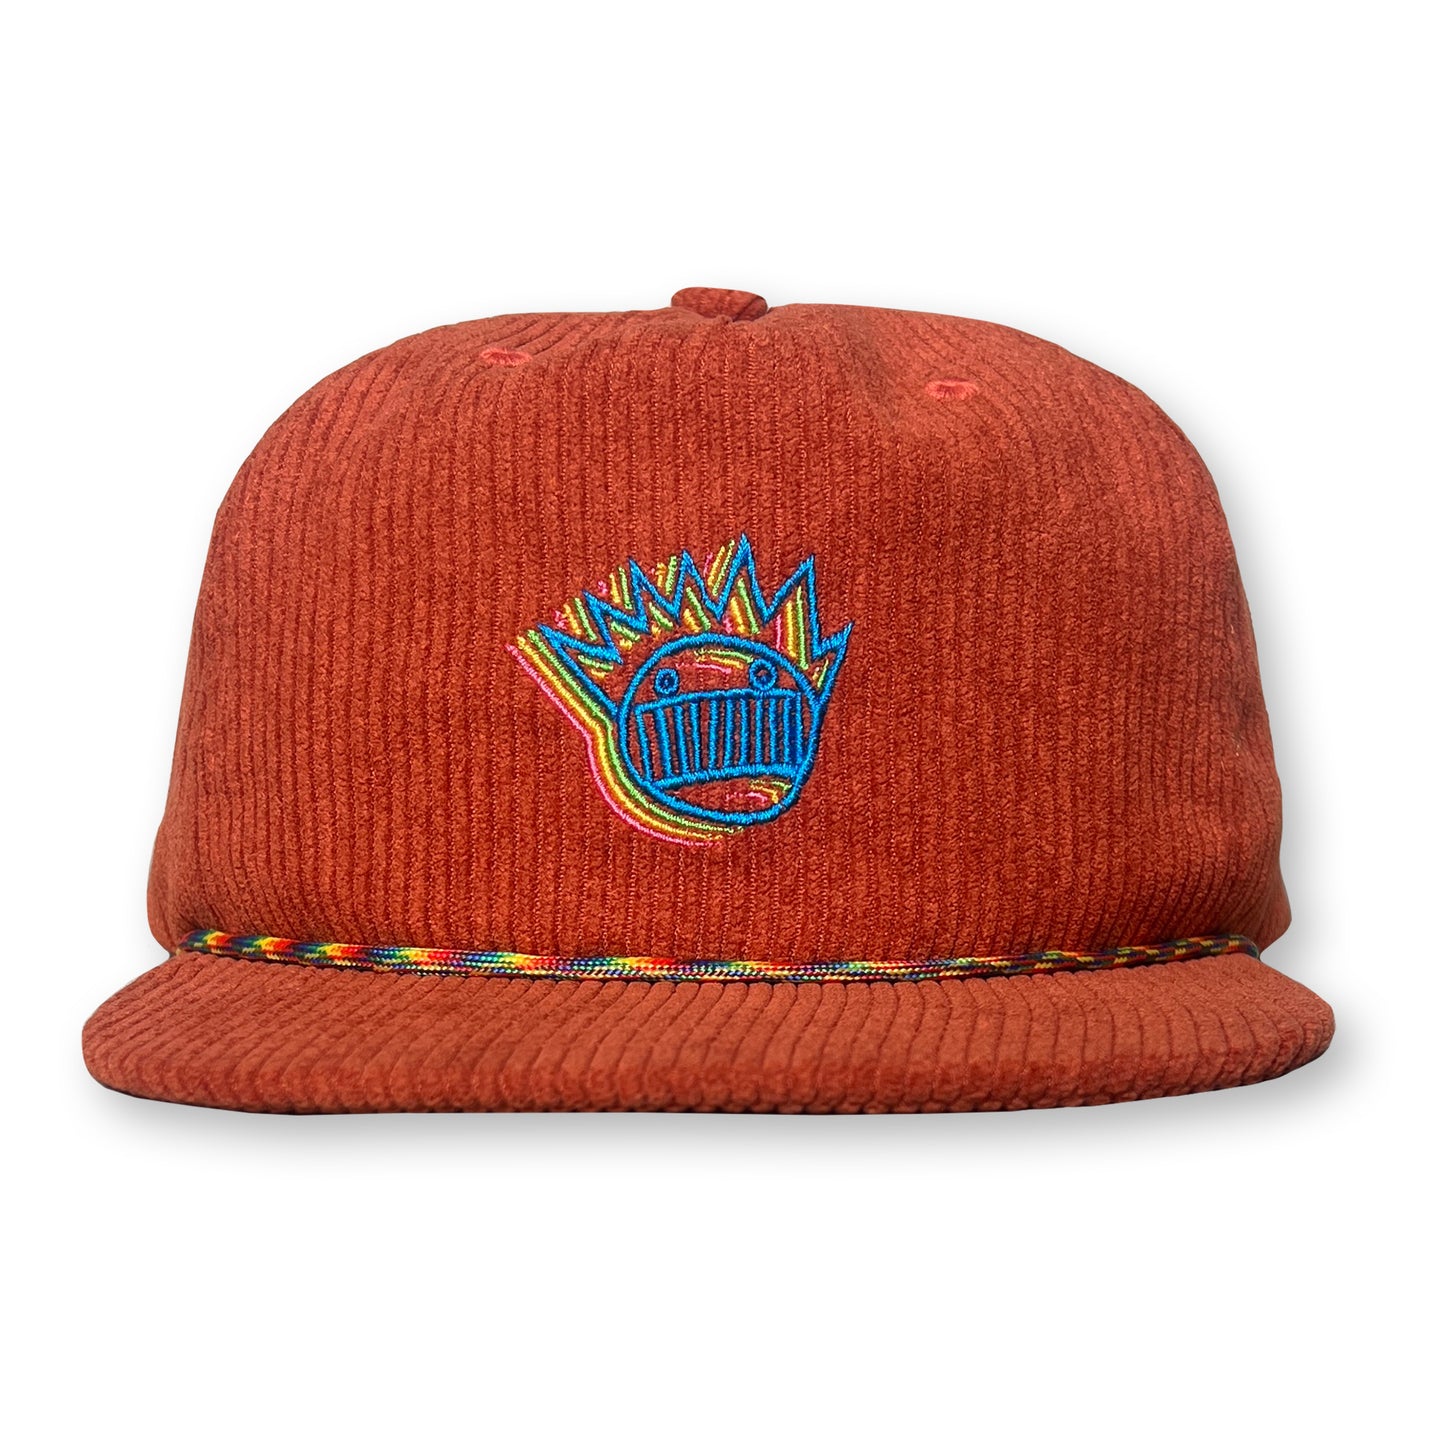 Ween Rope Hat / Burnt Orange Corduroy with Morning Glory Boognish